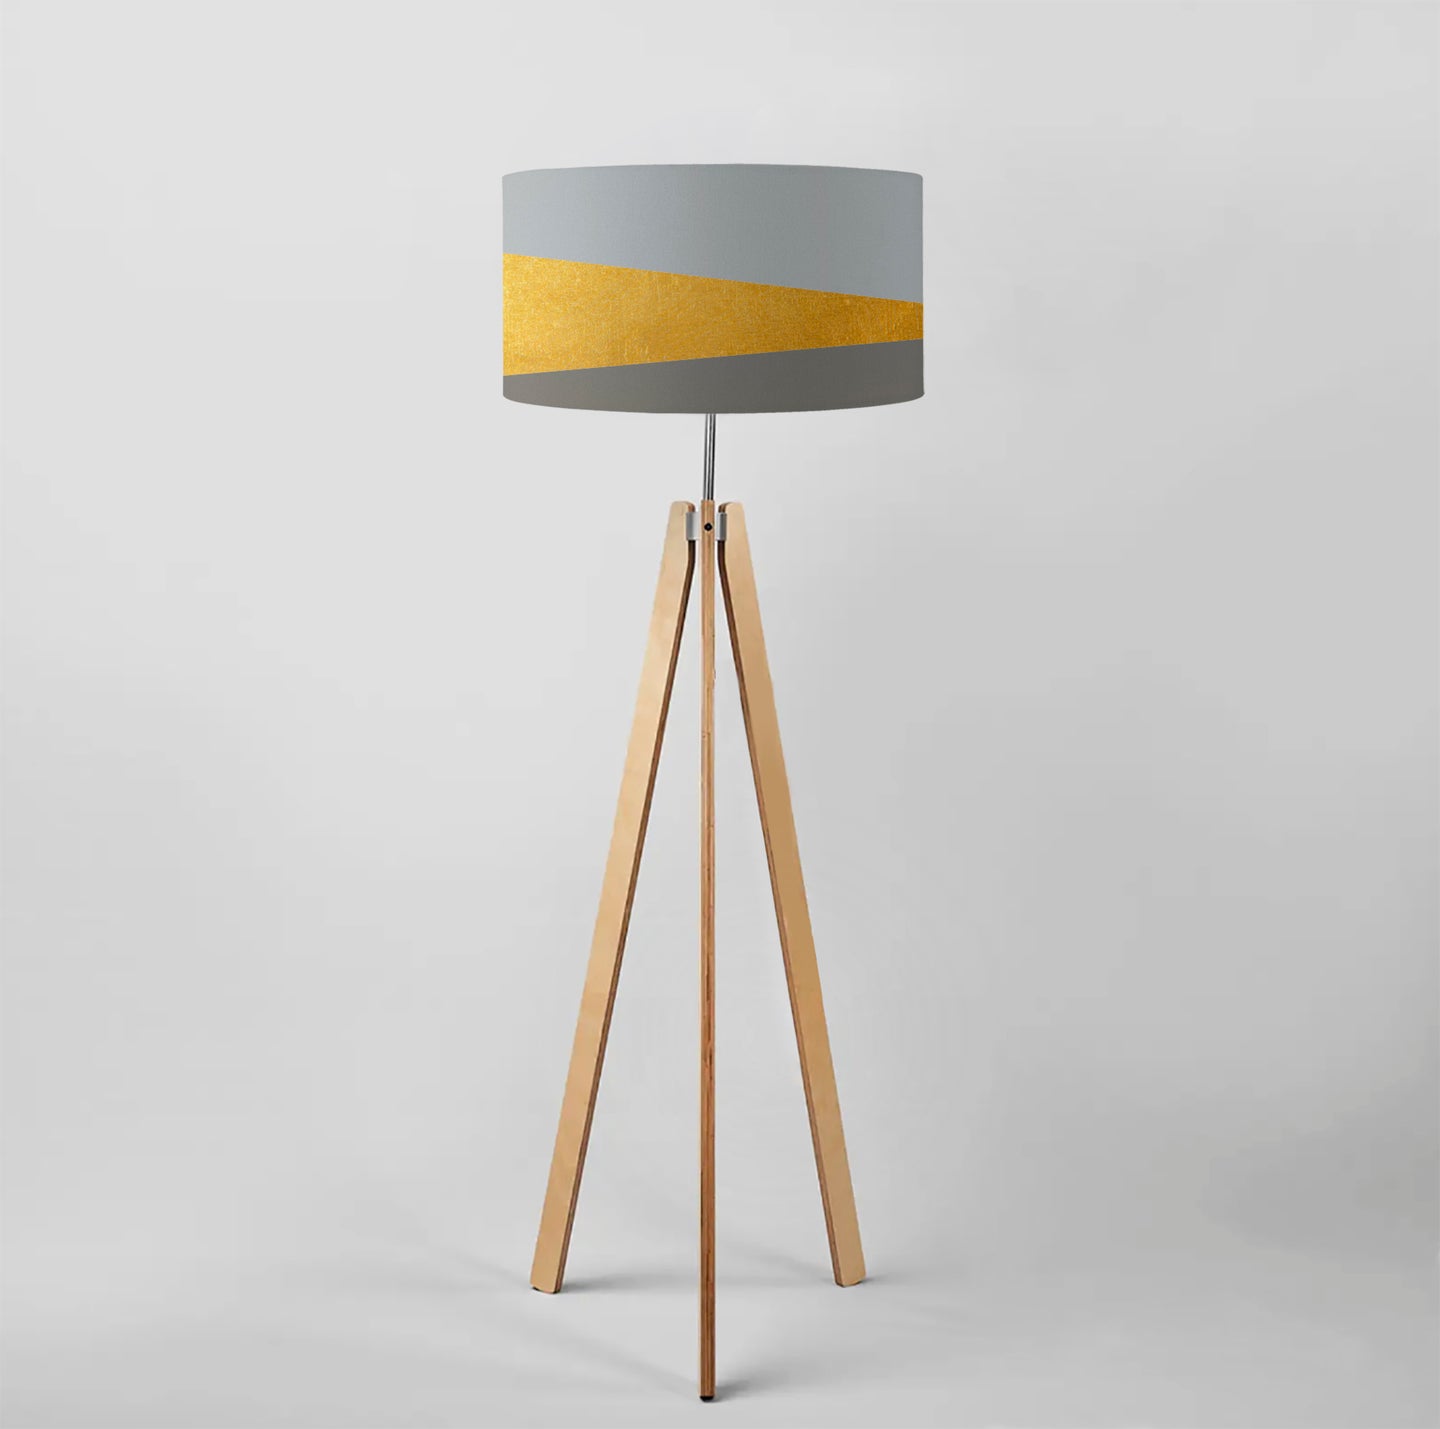 Gold and Shades of Grey drum lampshade, Diameter 45cm (18